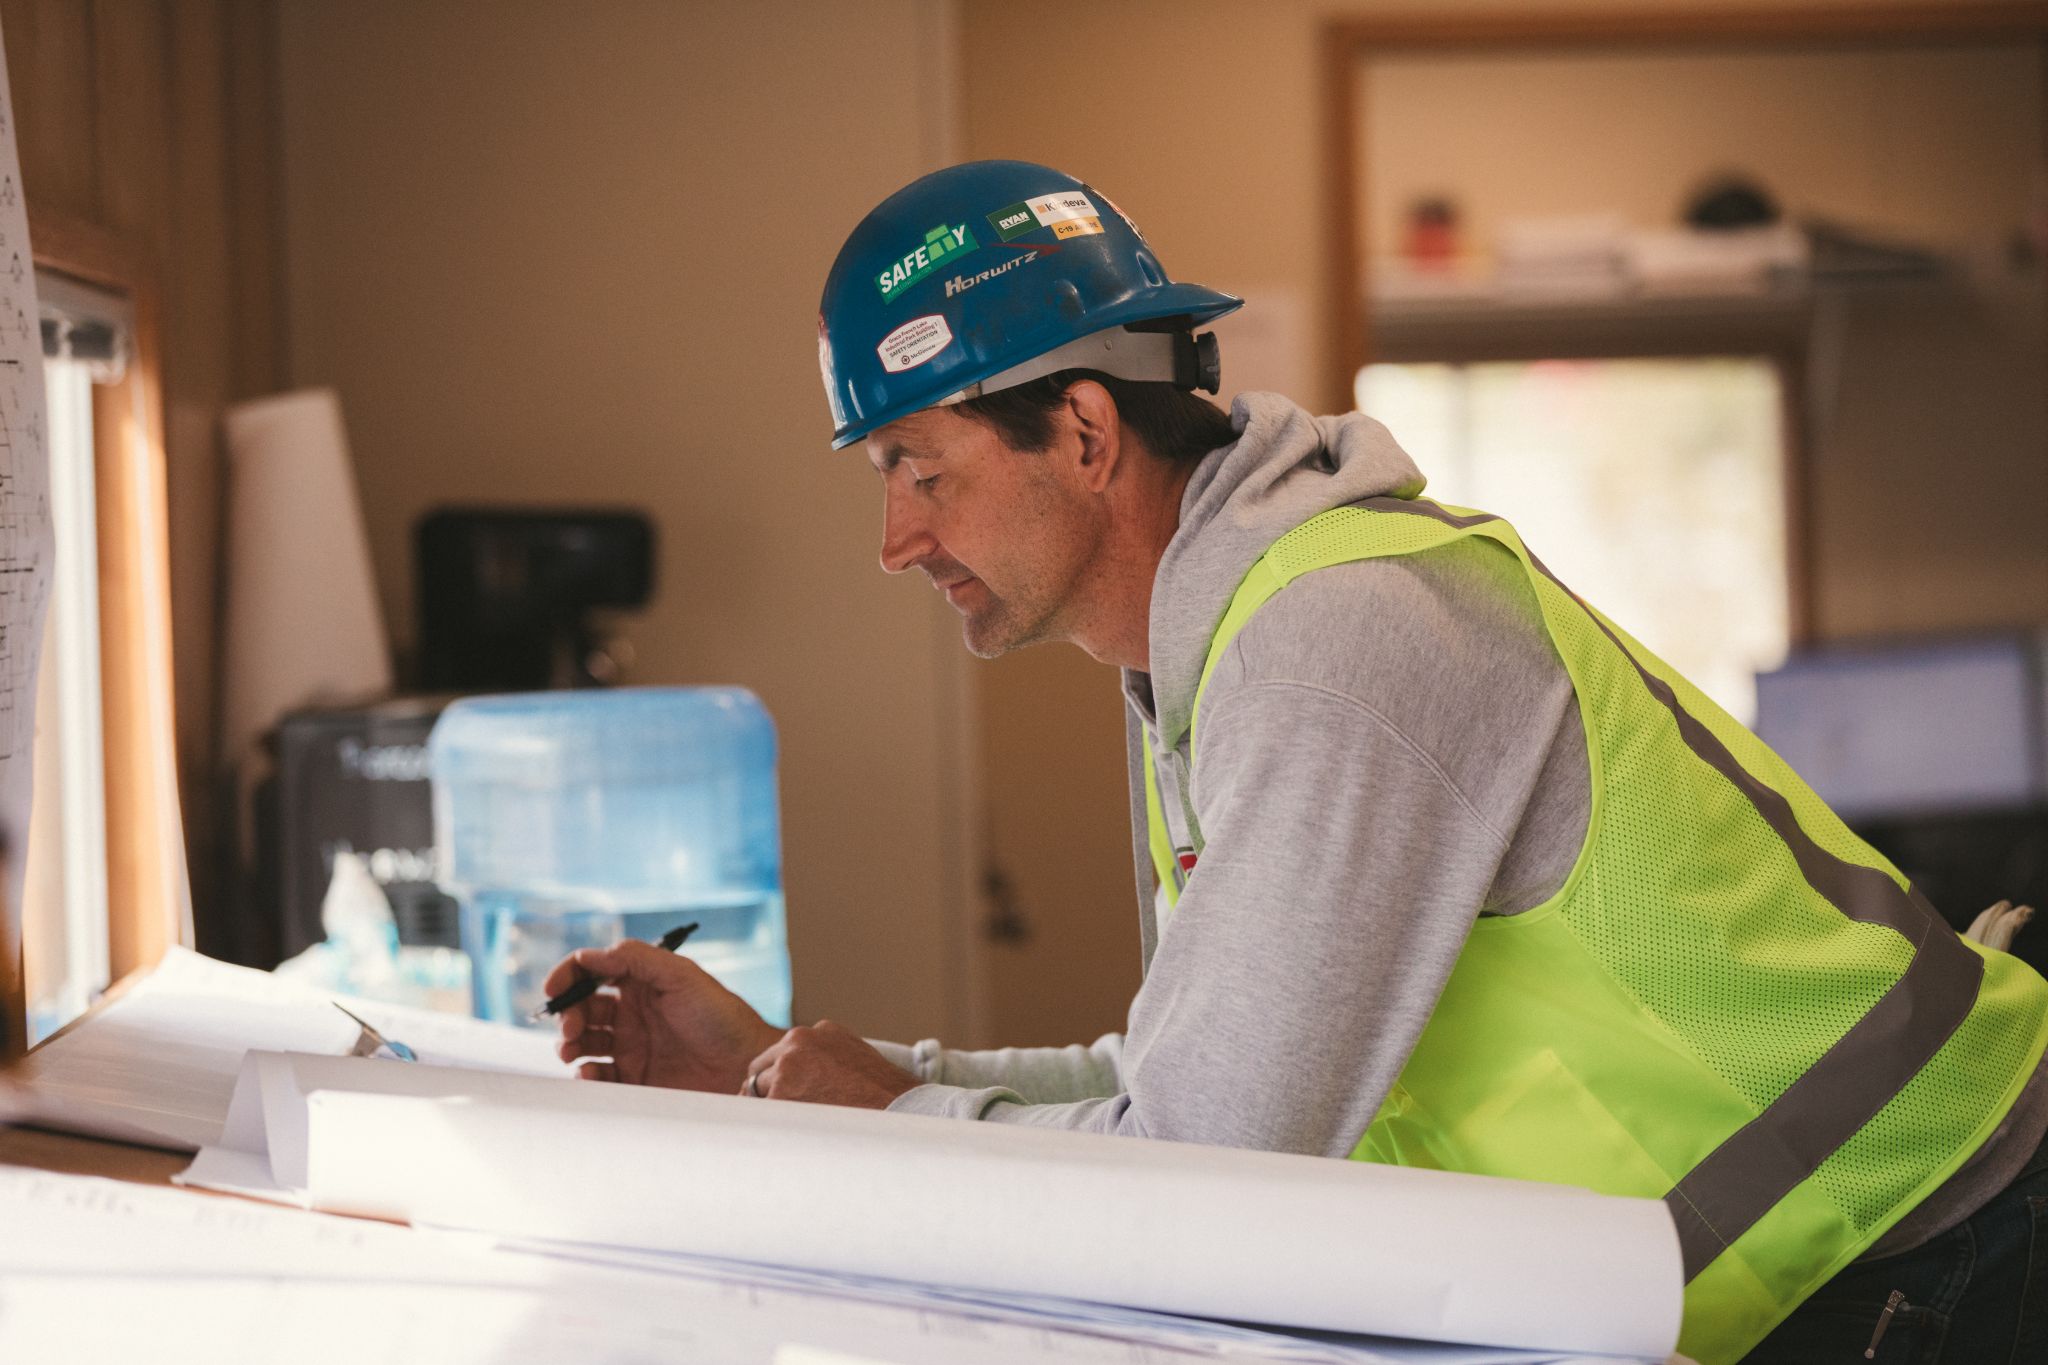 Side profile of construction worker wearing a blue hardhat and safety vest looking over a blueprint